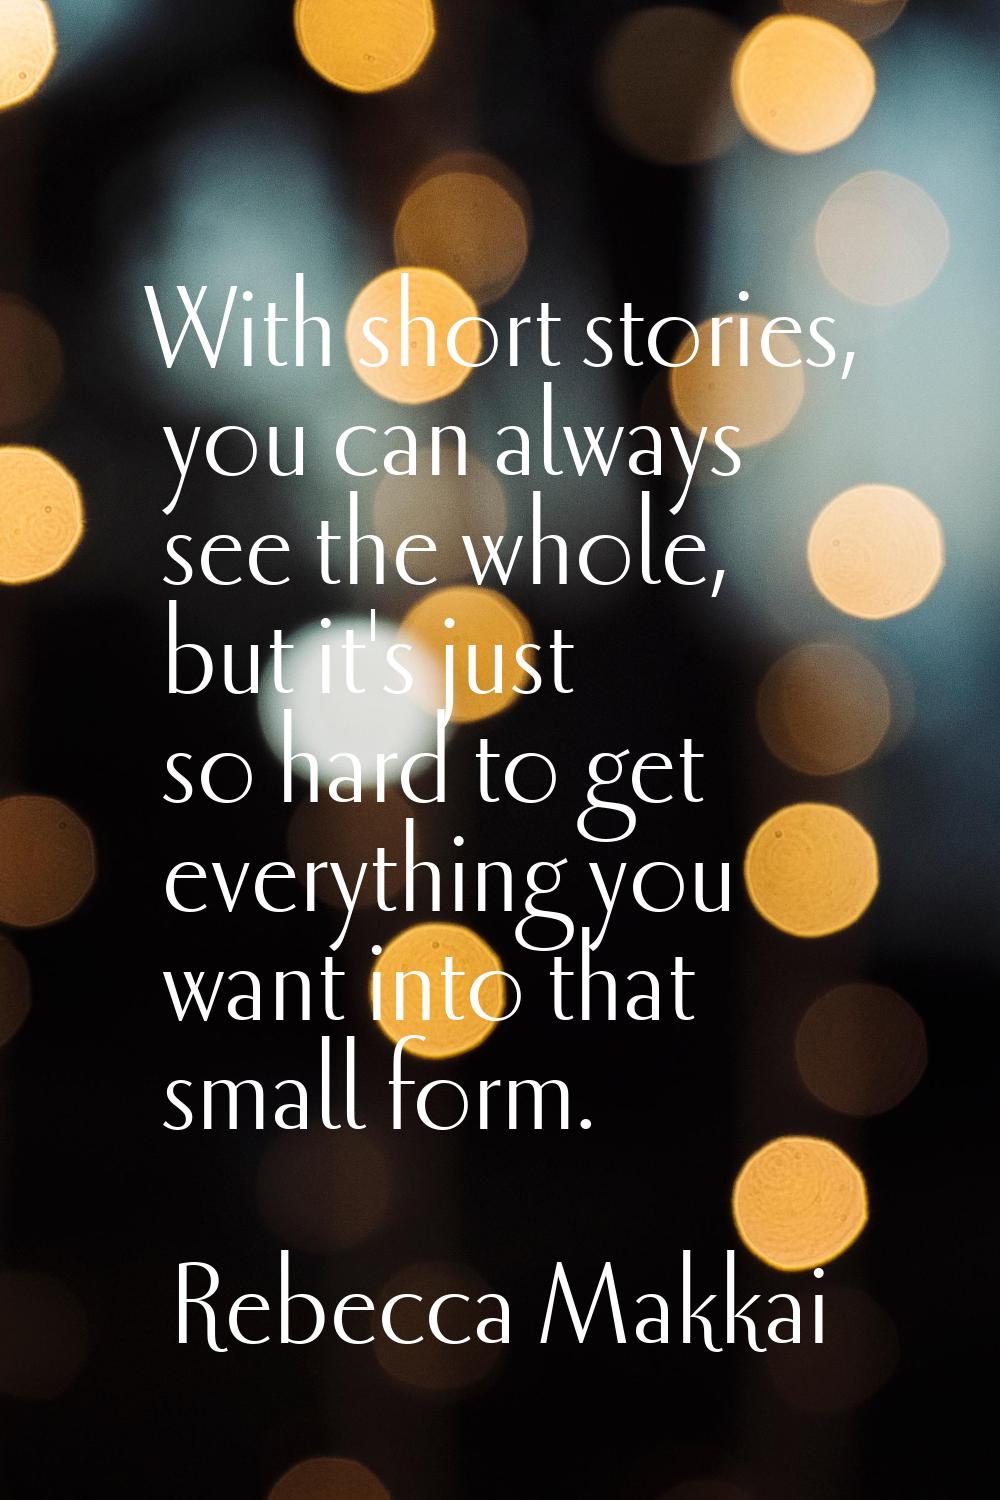 With short stories, you can always see the whole, but it's just so hard to get everything you want 